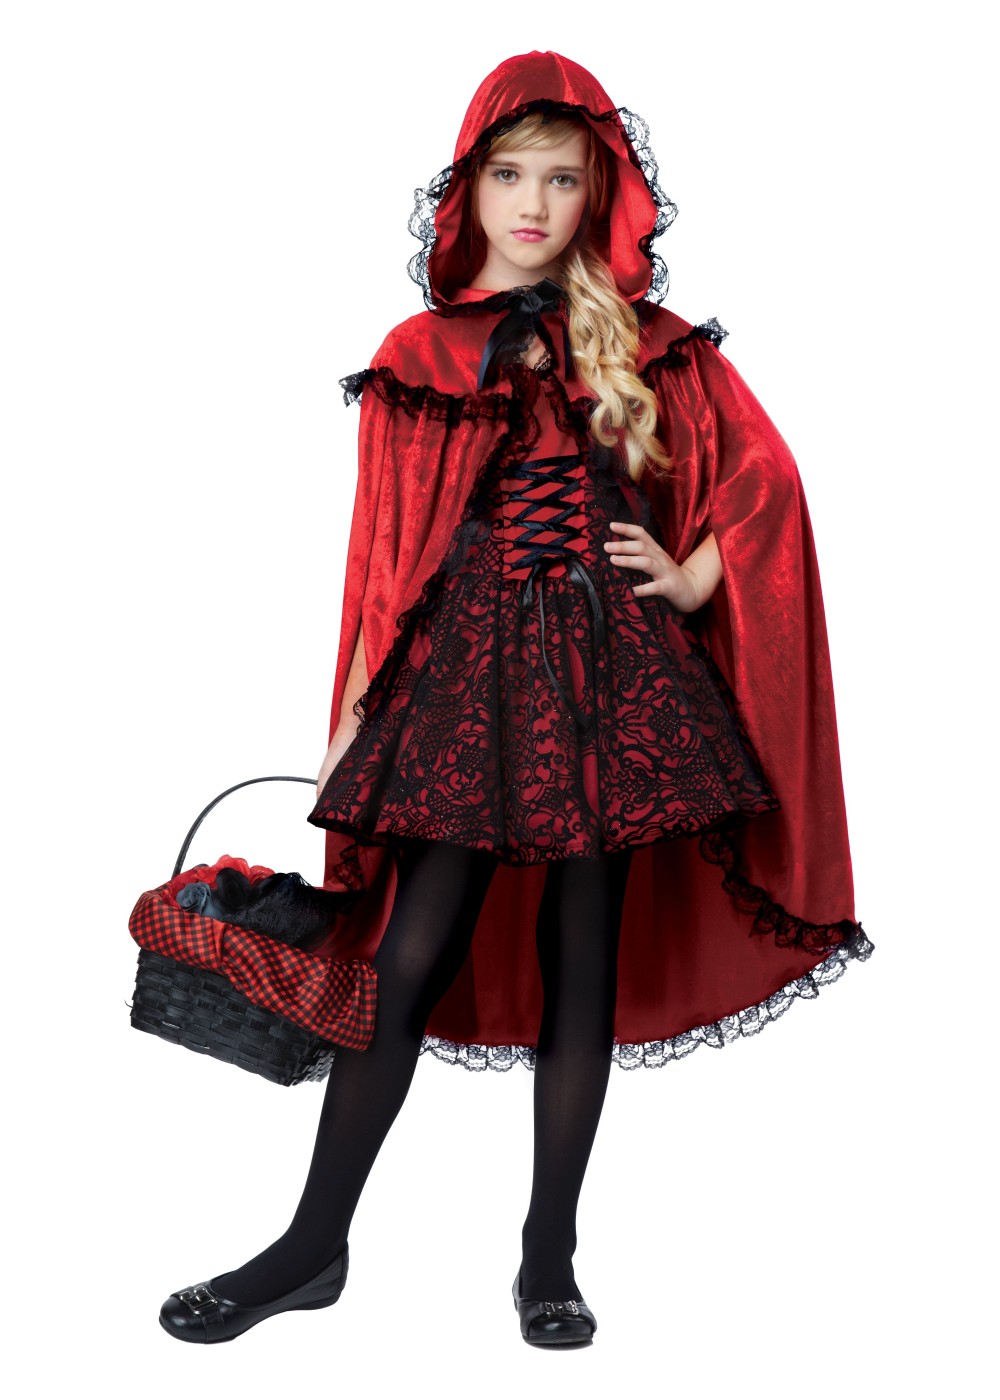 Red Riding Hood Girls Costume - General Category